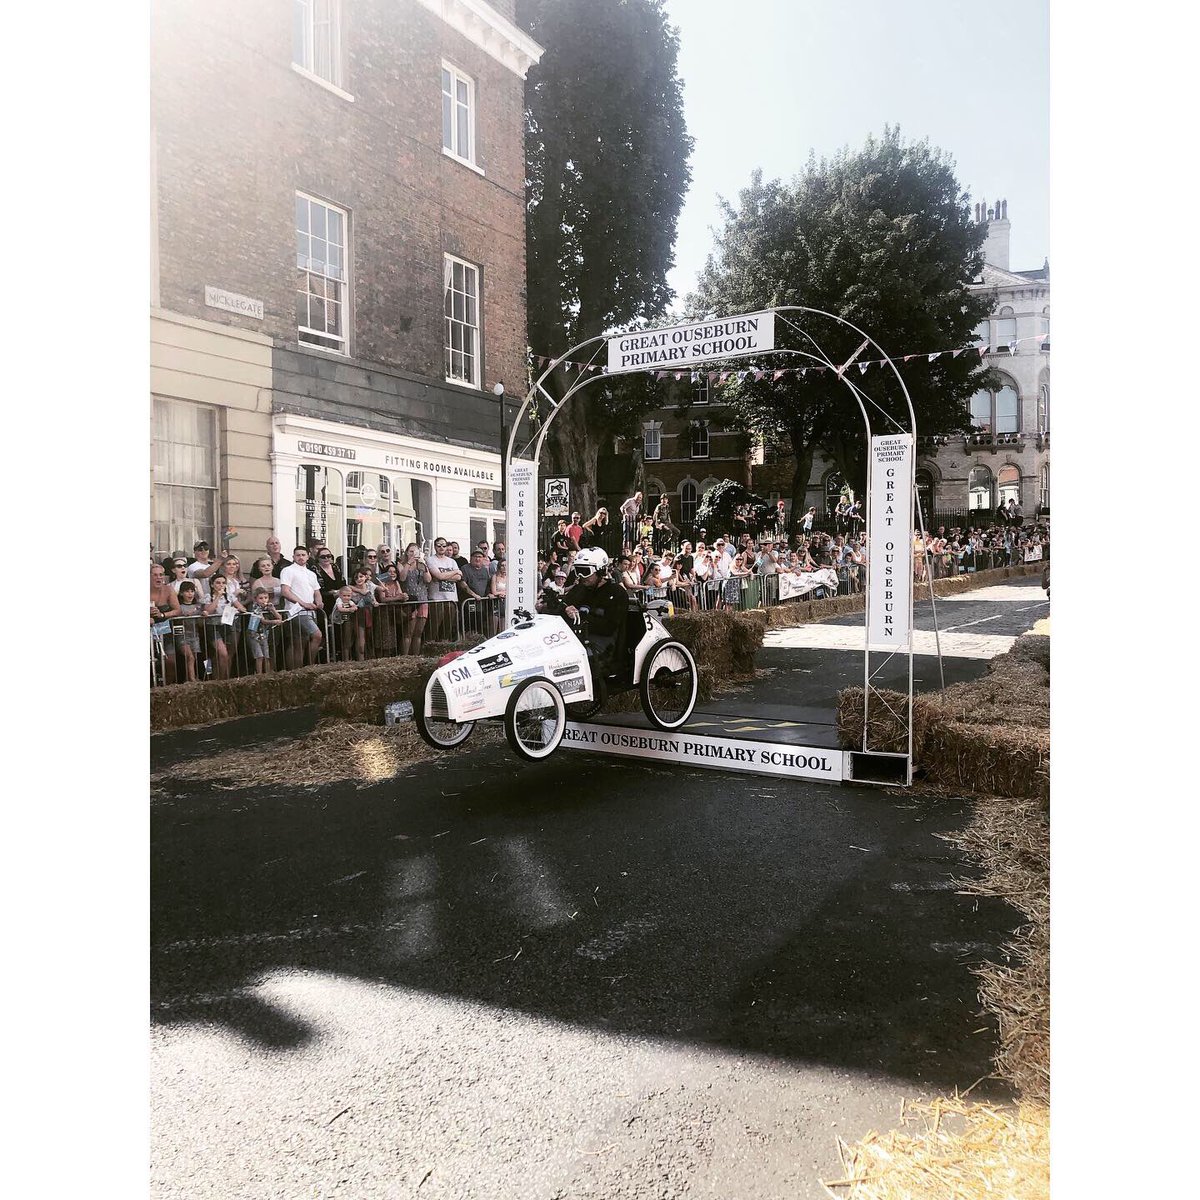 Absolutely amazing time at the @MicklegateRun thank you to all who organised such a great event! #makeityork #york #soapbox @minsterfm